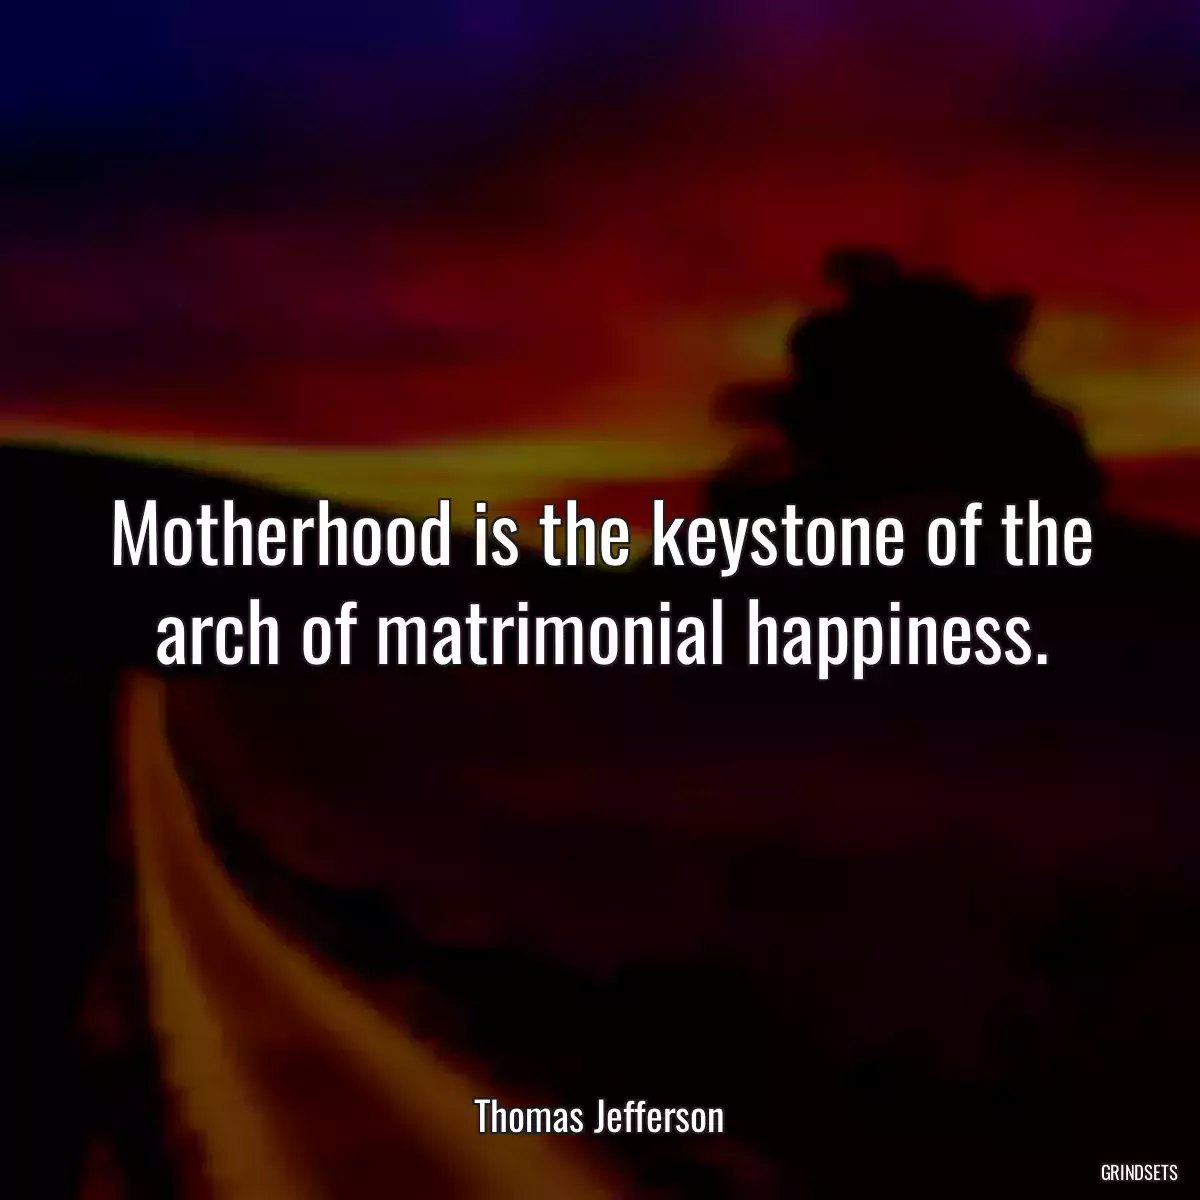 Motherhood is the keystone of the arch of matrimonial happiness.